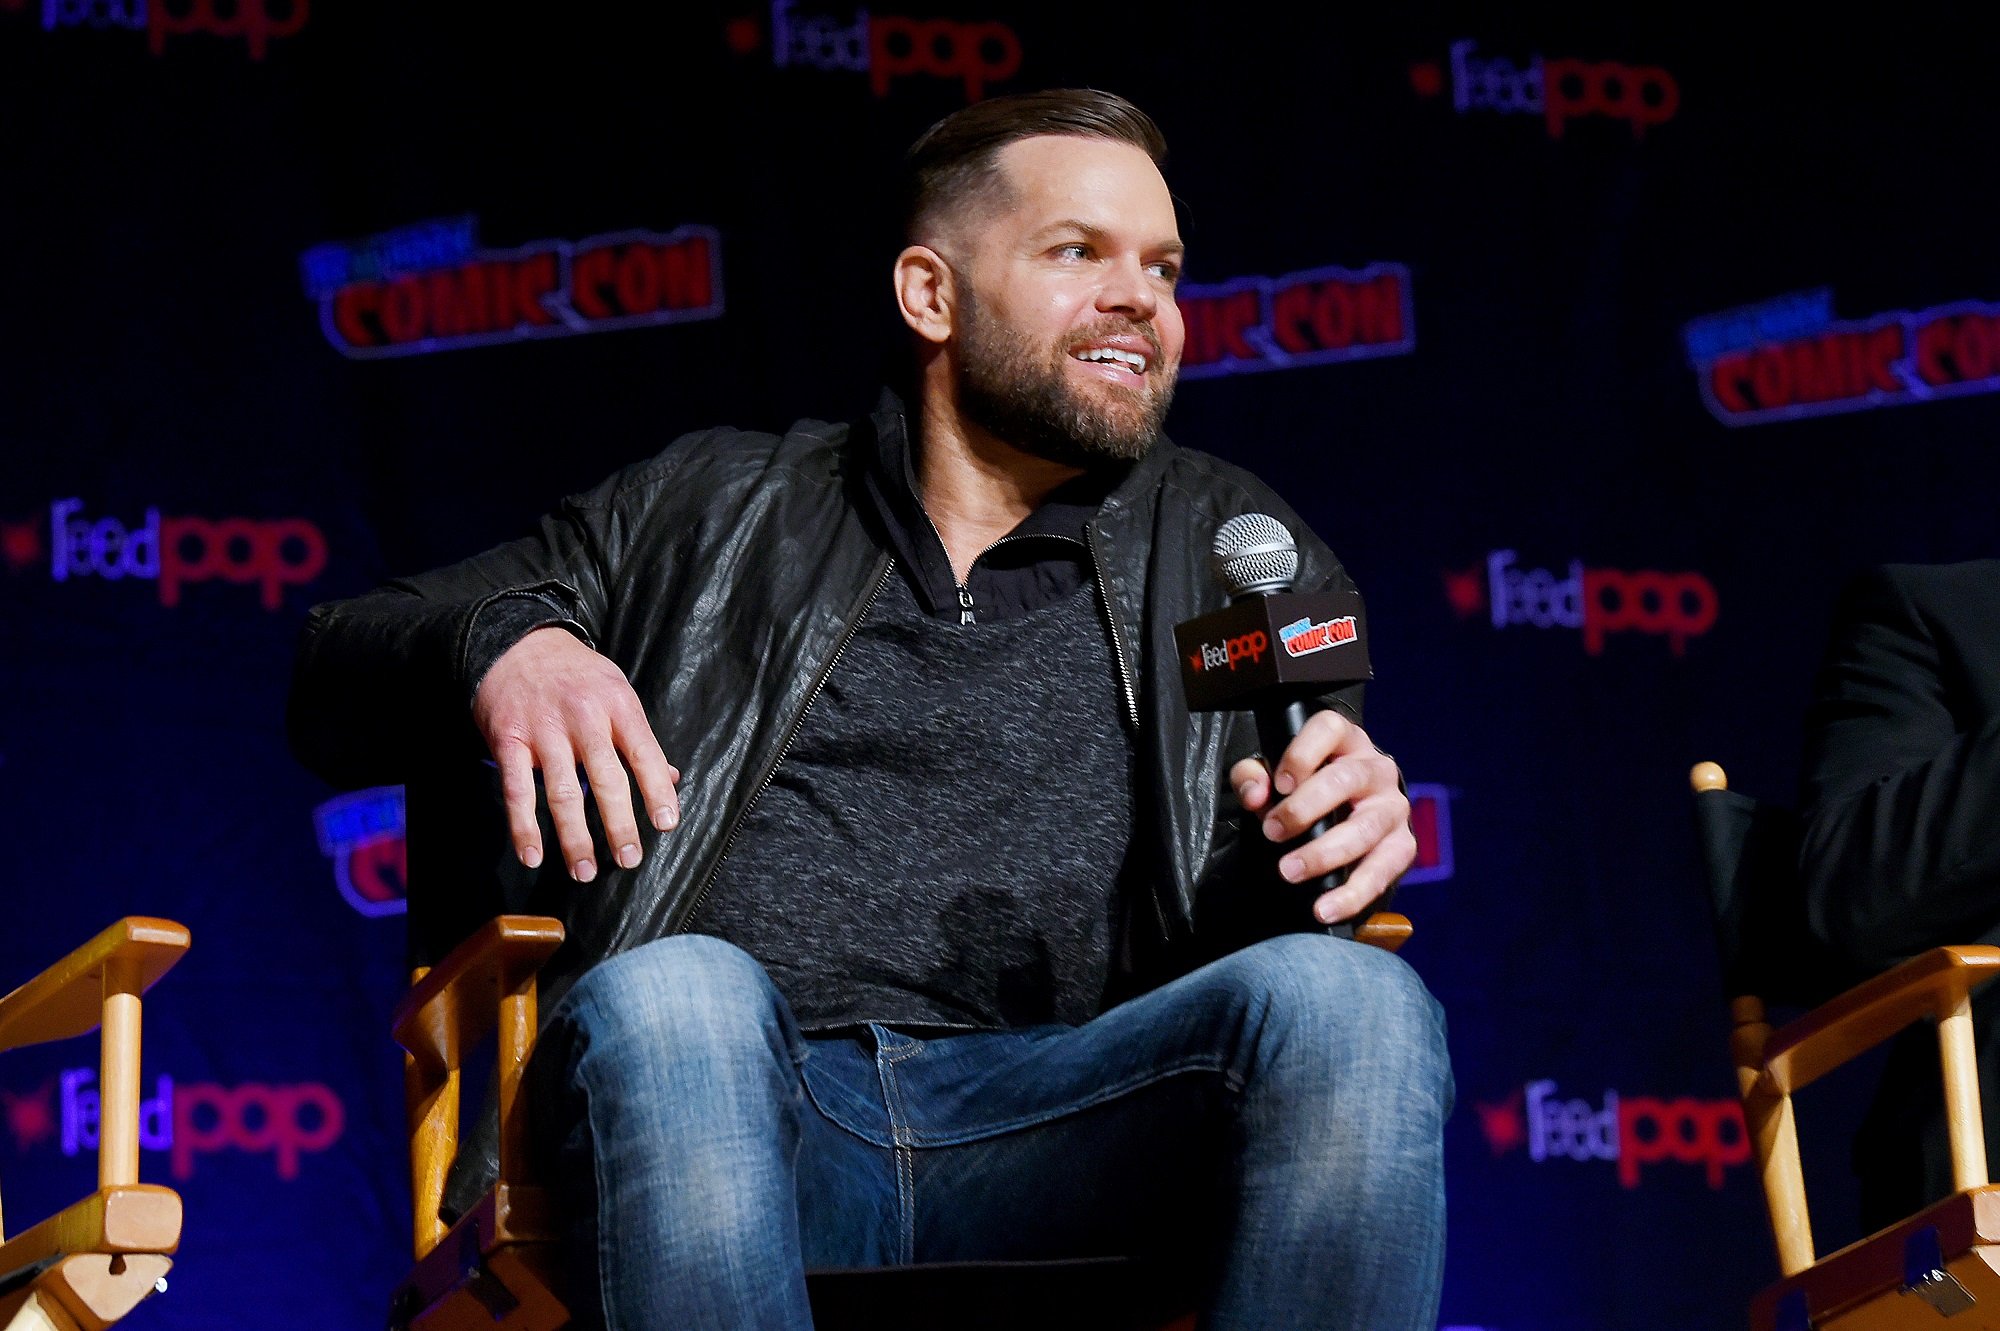 Wes Chatham plays Amos Burton in The Expanse